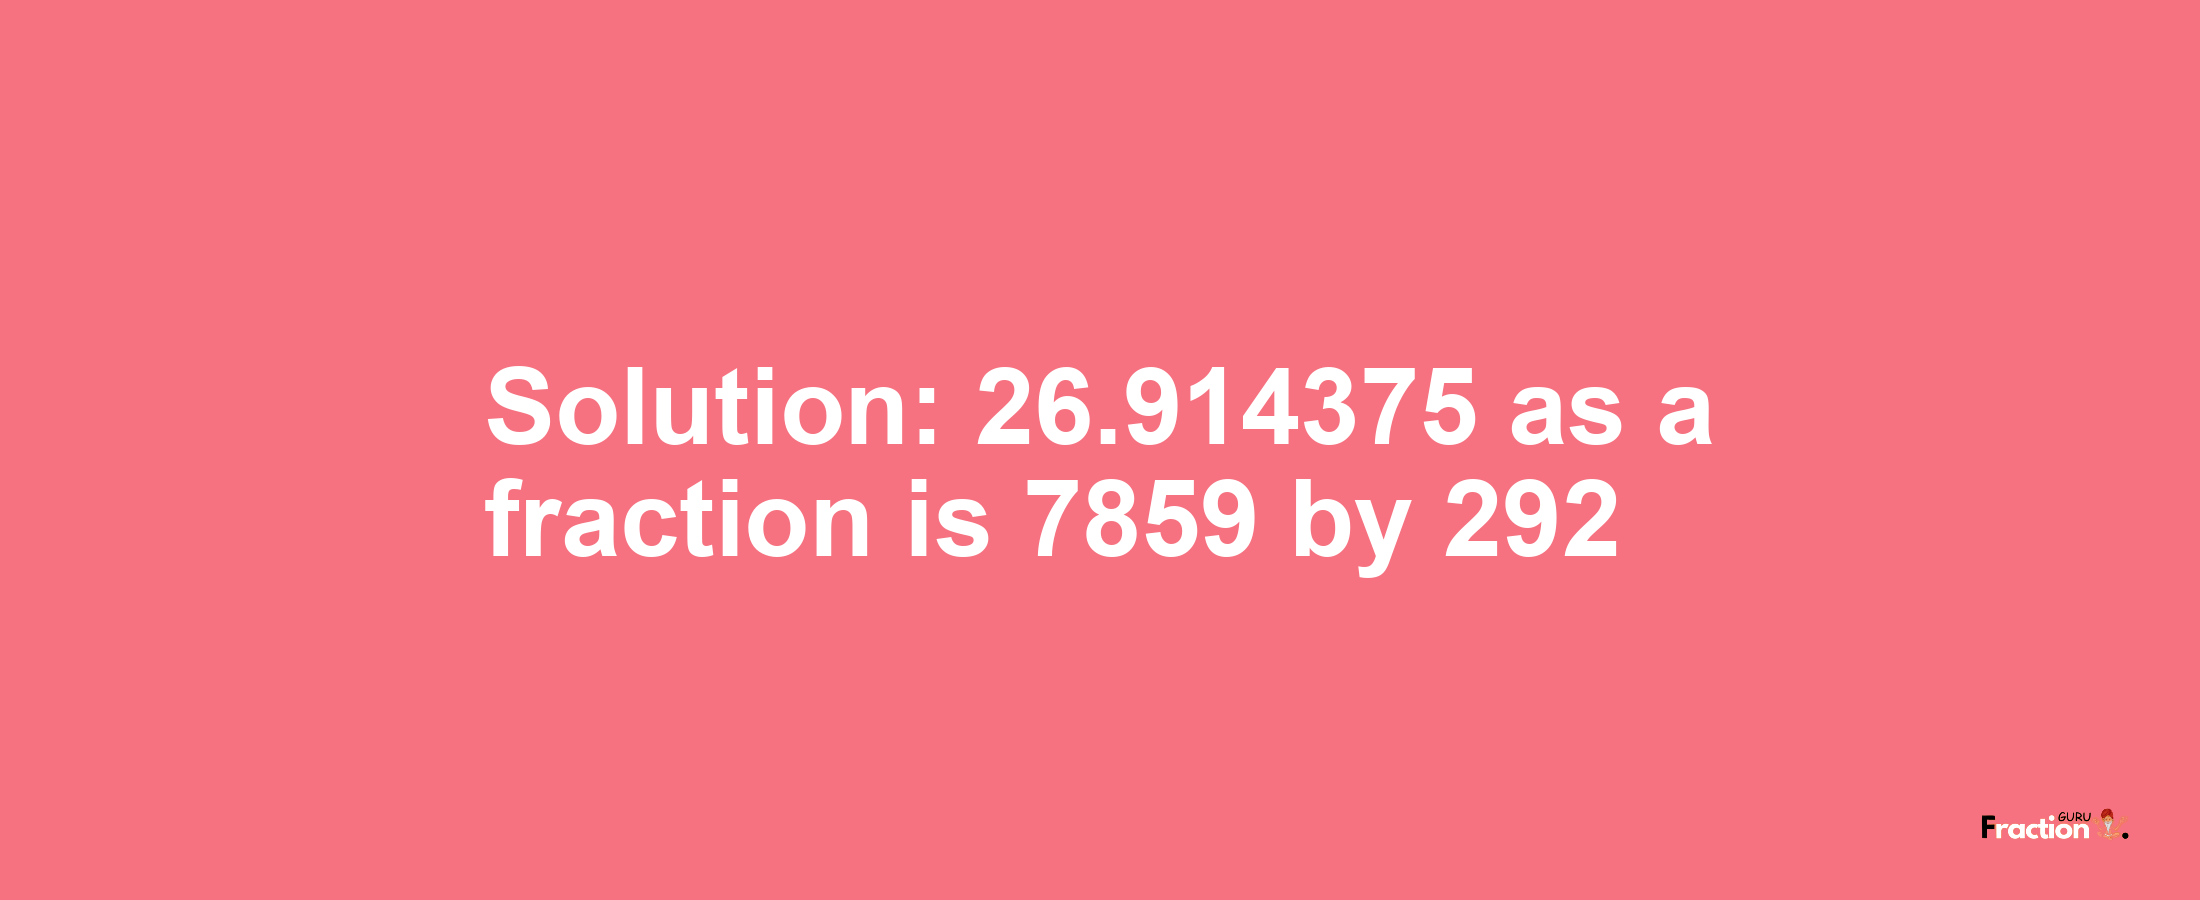 Solution:26.914375 as a fraction is 7859/292